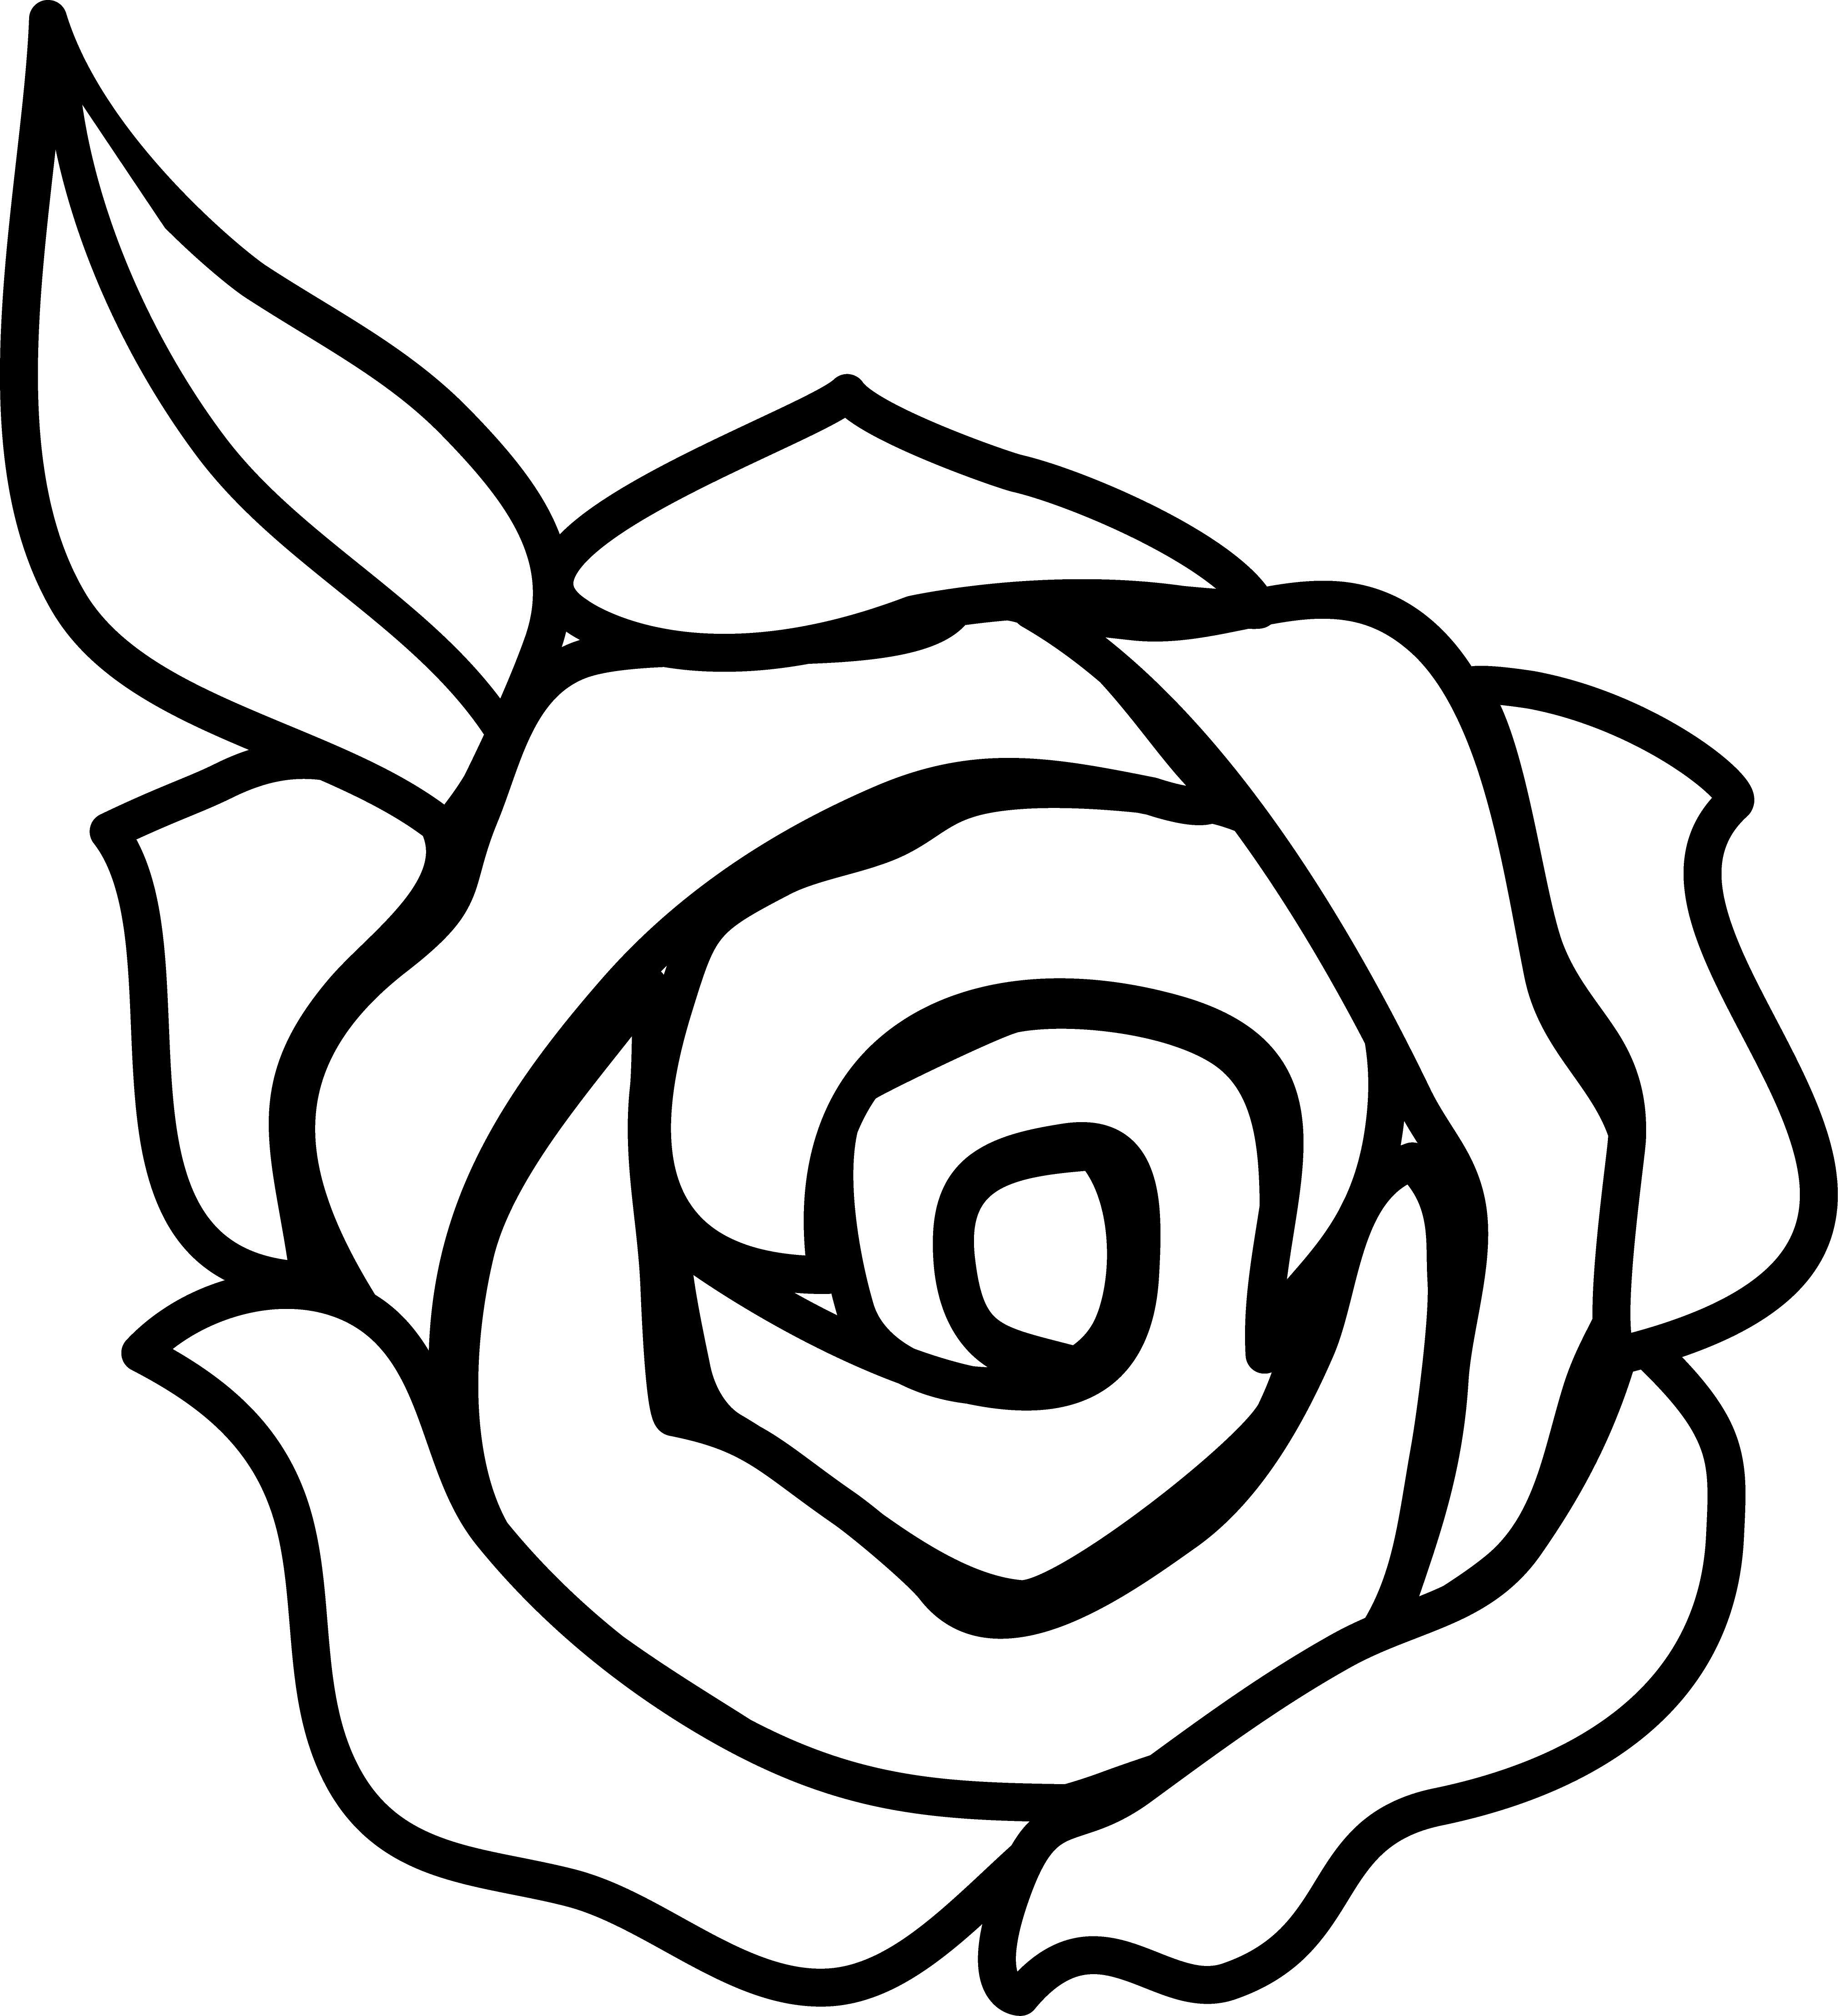 Free Line Drawing Of A Rose Download Free Clip Art Free Clip Art On Clipart Library